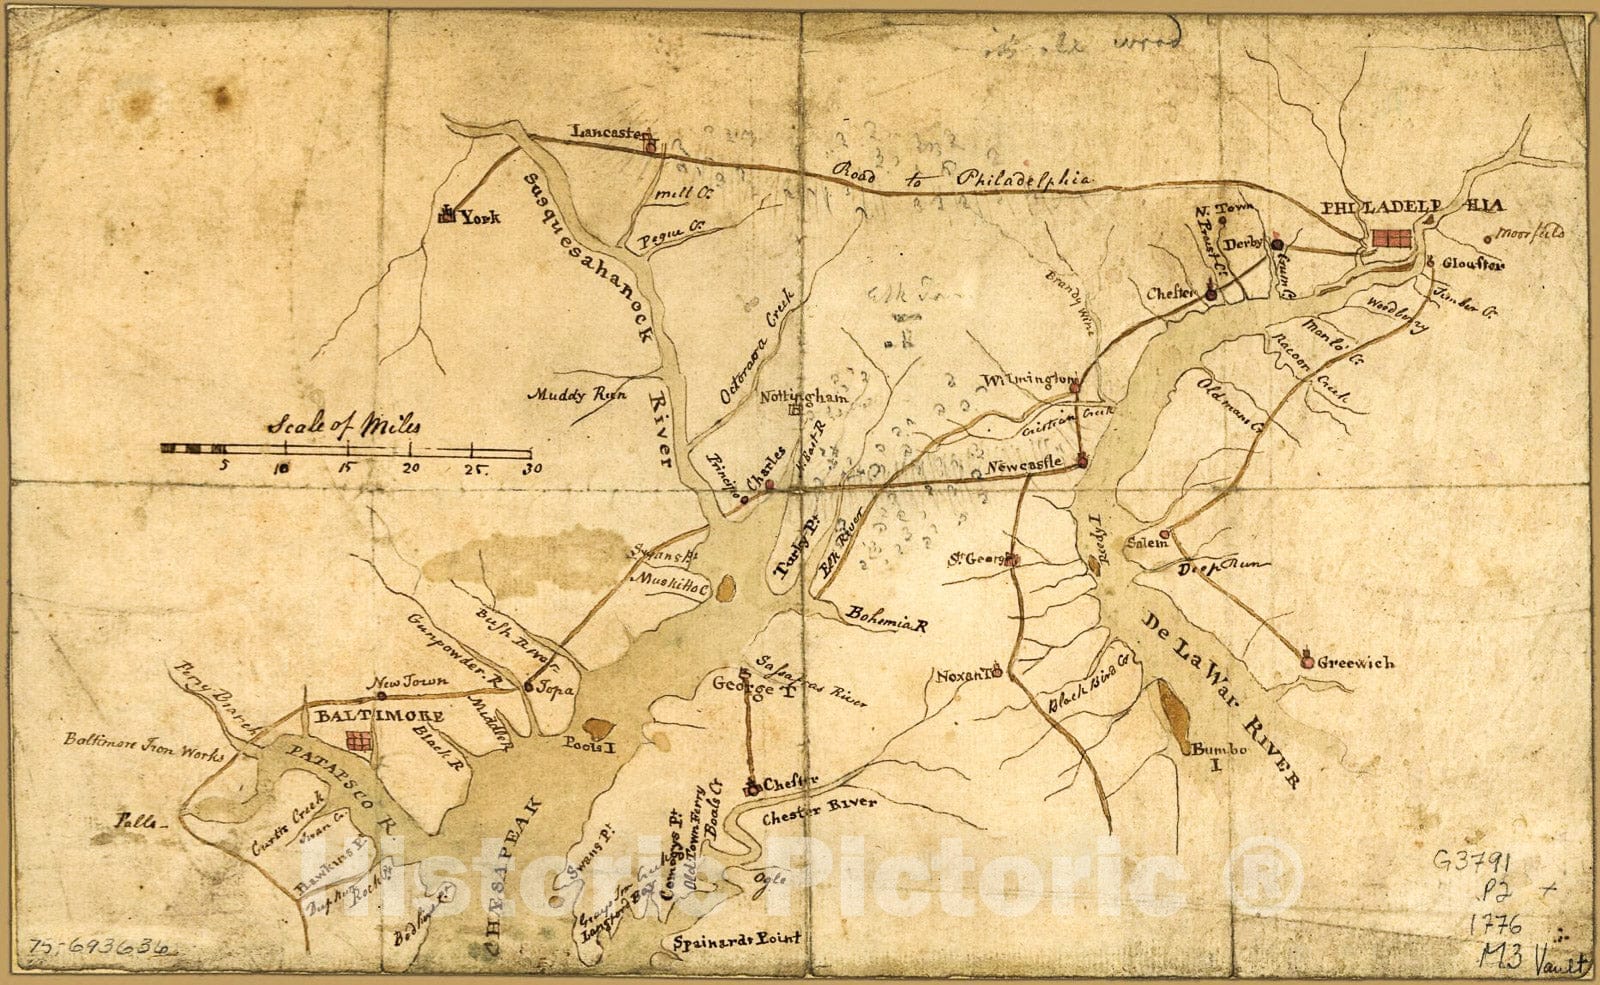 Historic 1776 Map - Map of The Country Between and bordering The Delaware River and Chesapeake Bay, Showing Roads to Philadelphia and localities.